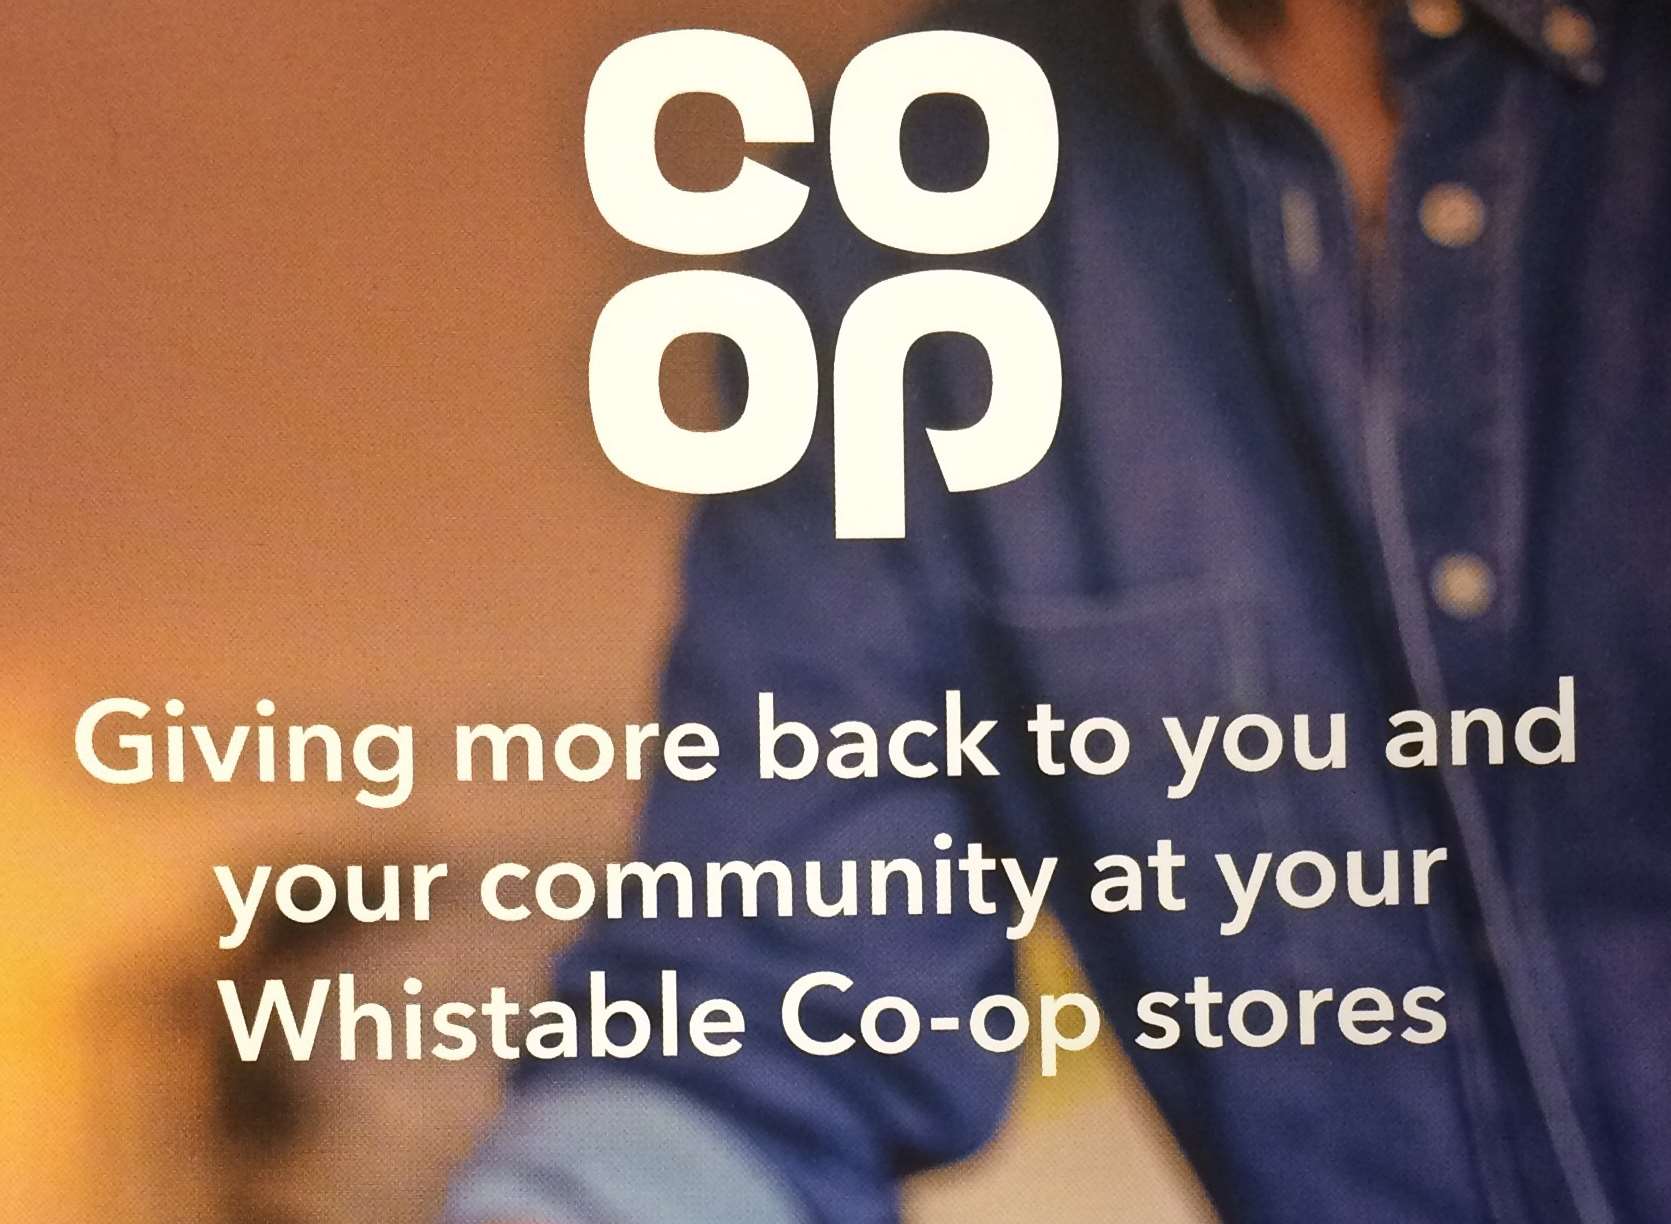 A Co-op leaflet is circulating around Whitstable with the town name misspelt